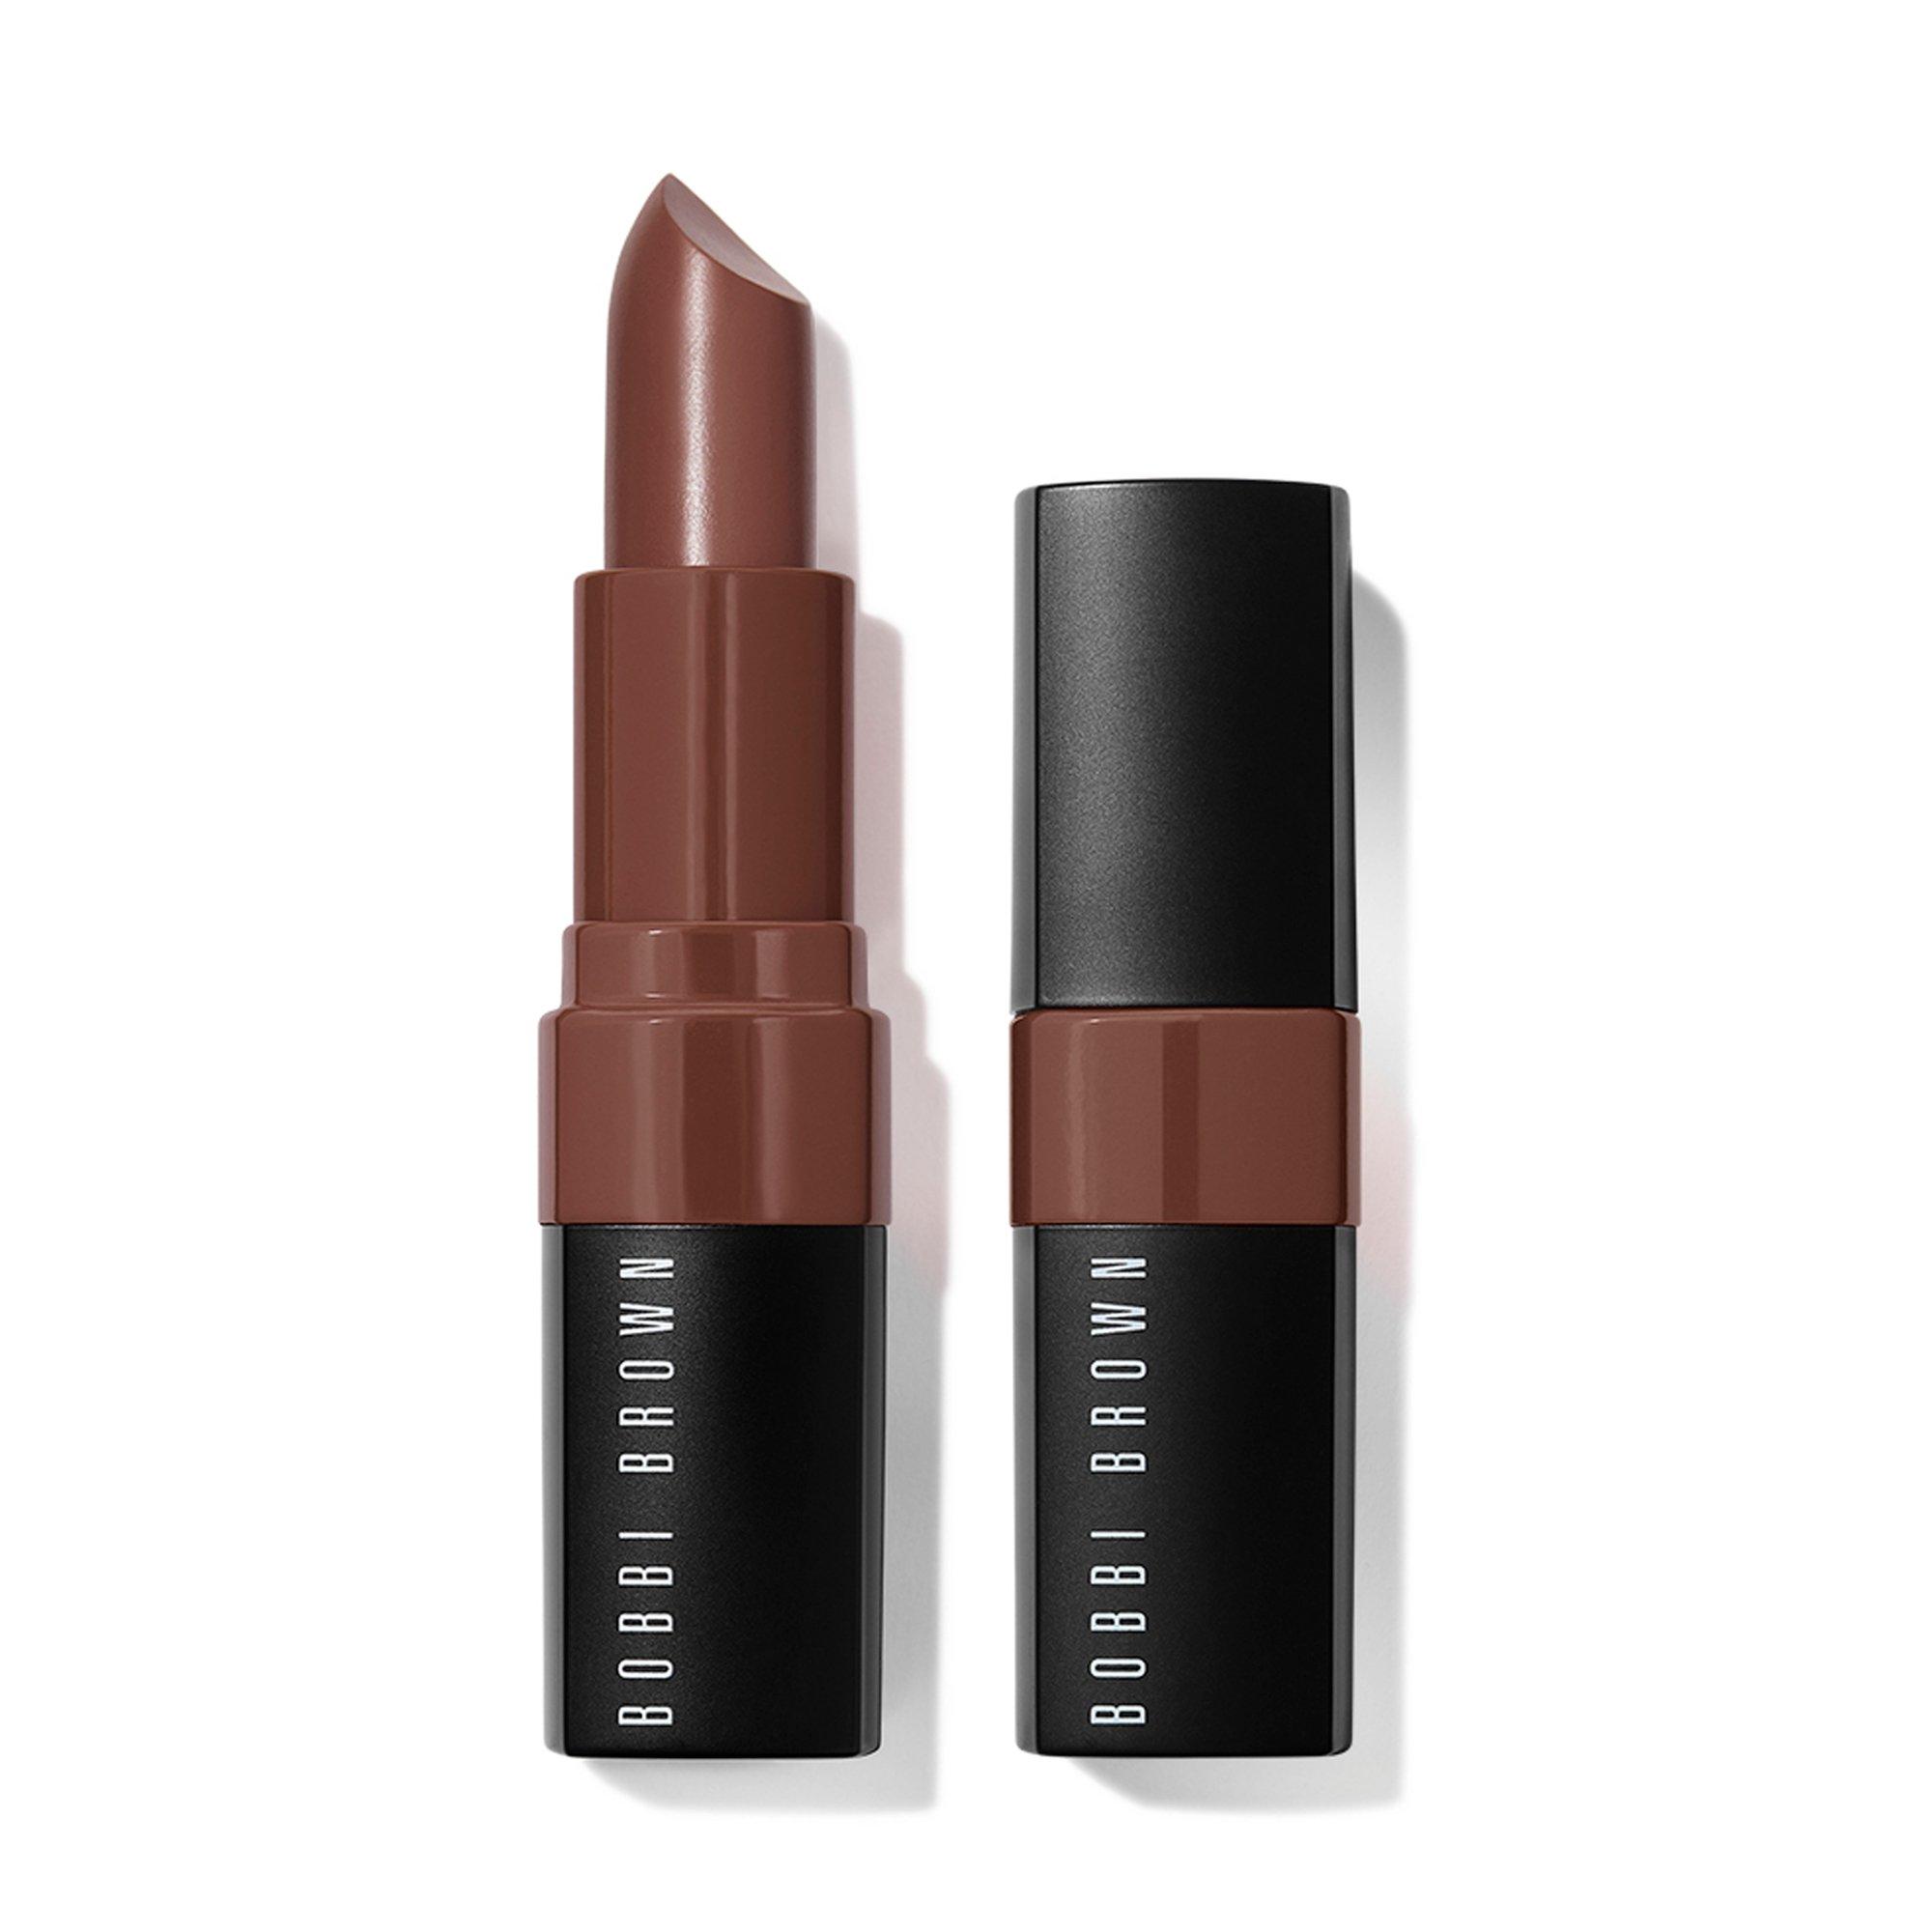 BOBBI BROWN Crushed Lip Color Unisexe Rich Cocoa